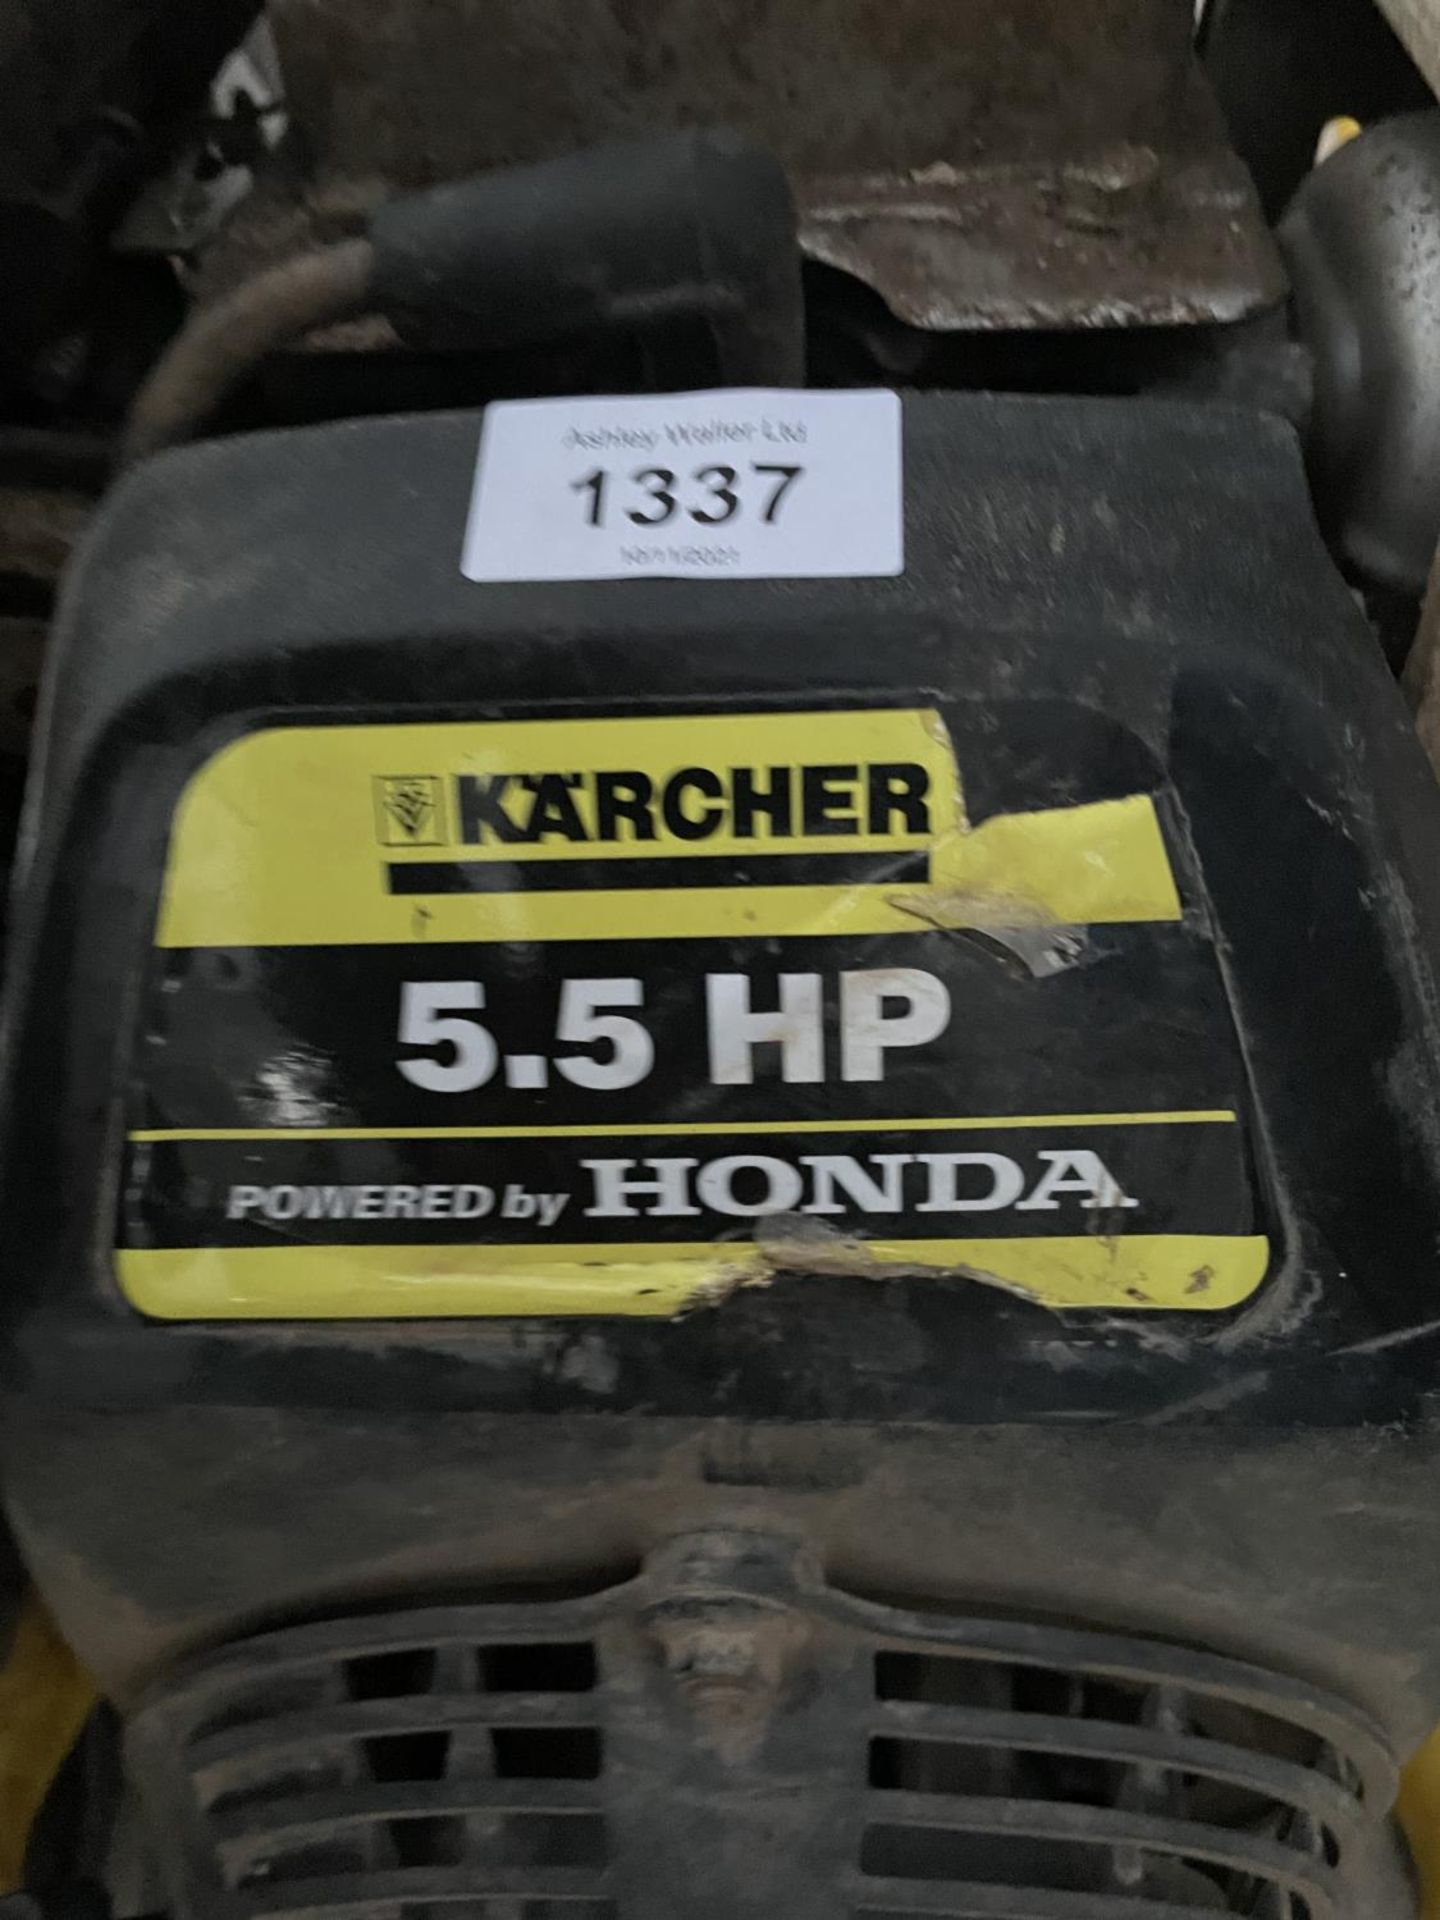 A KARCHER 5.5 HP PRESSURE WASHER WITH HONDA ENGINE - Image 3 of 4